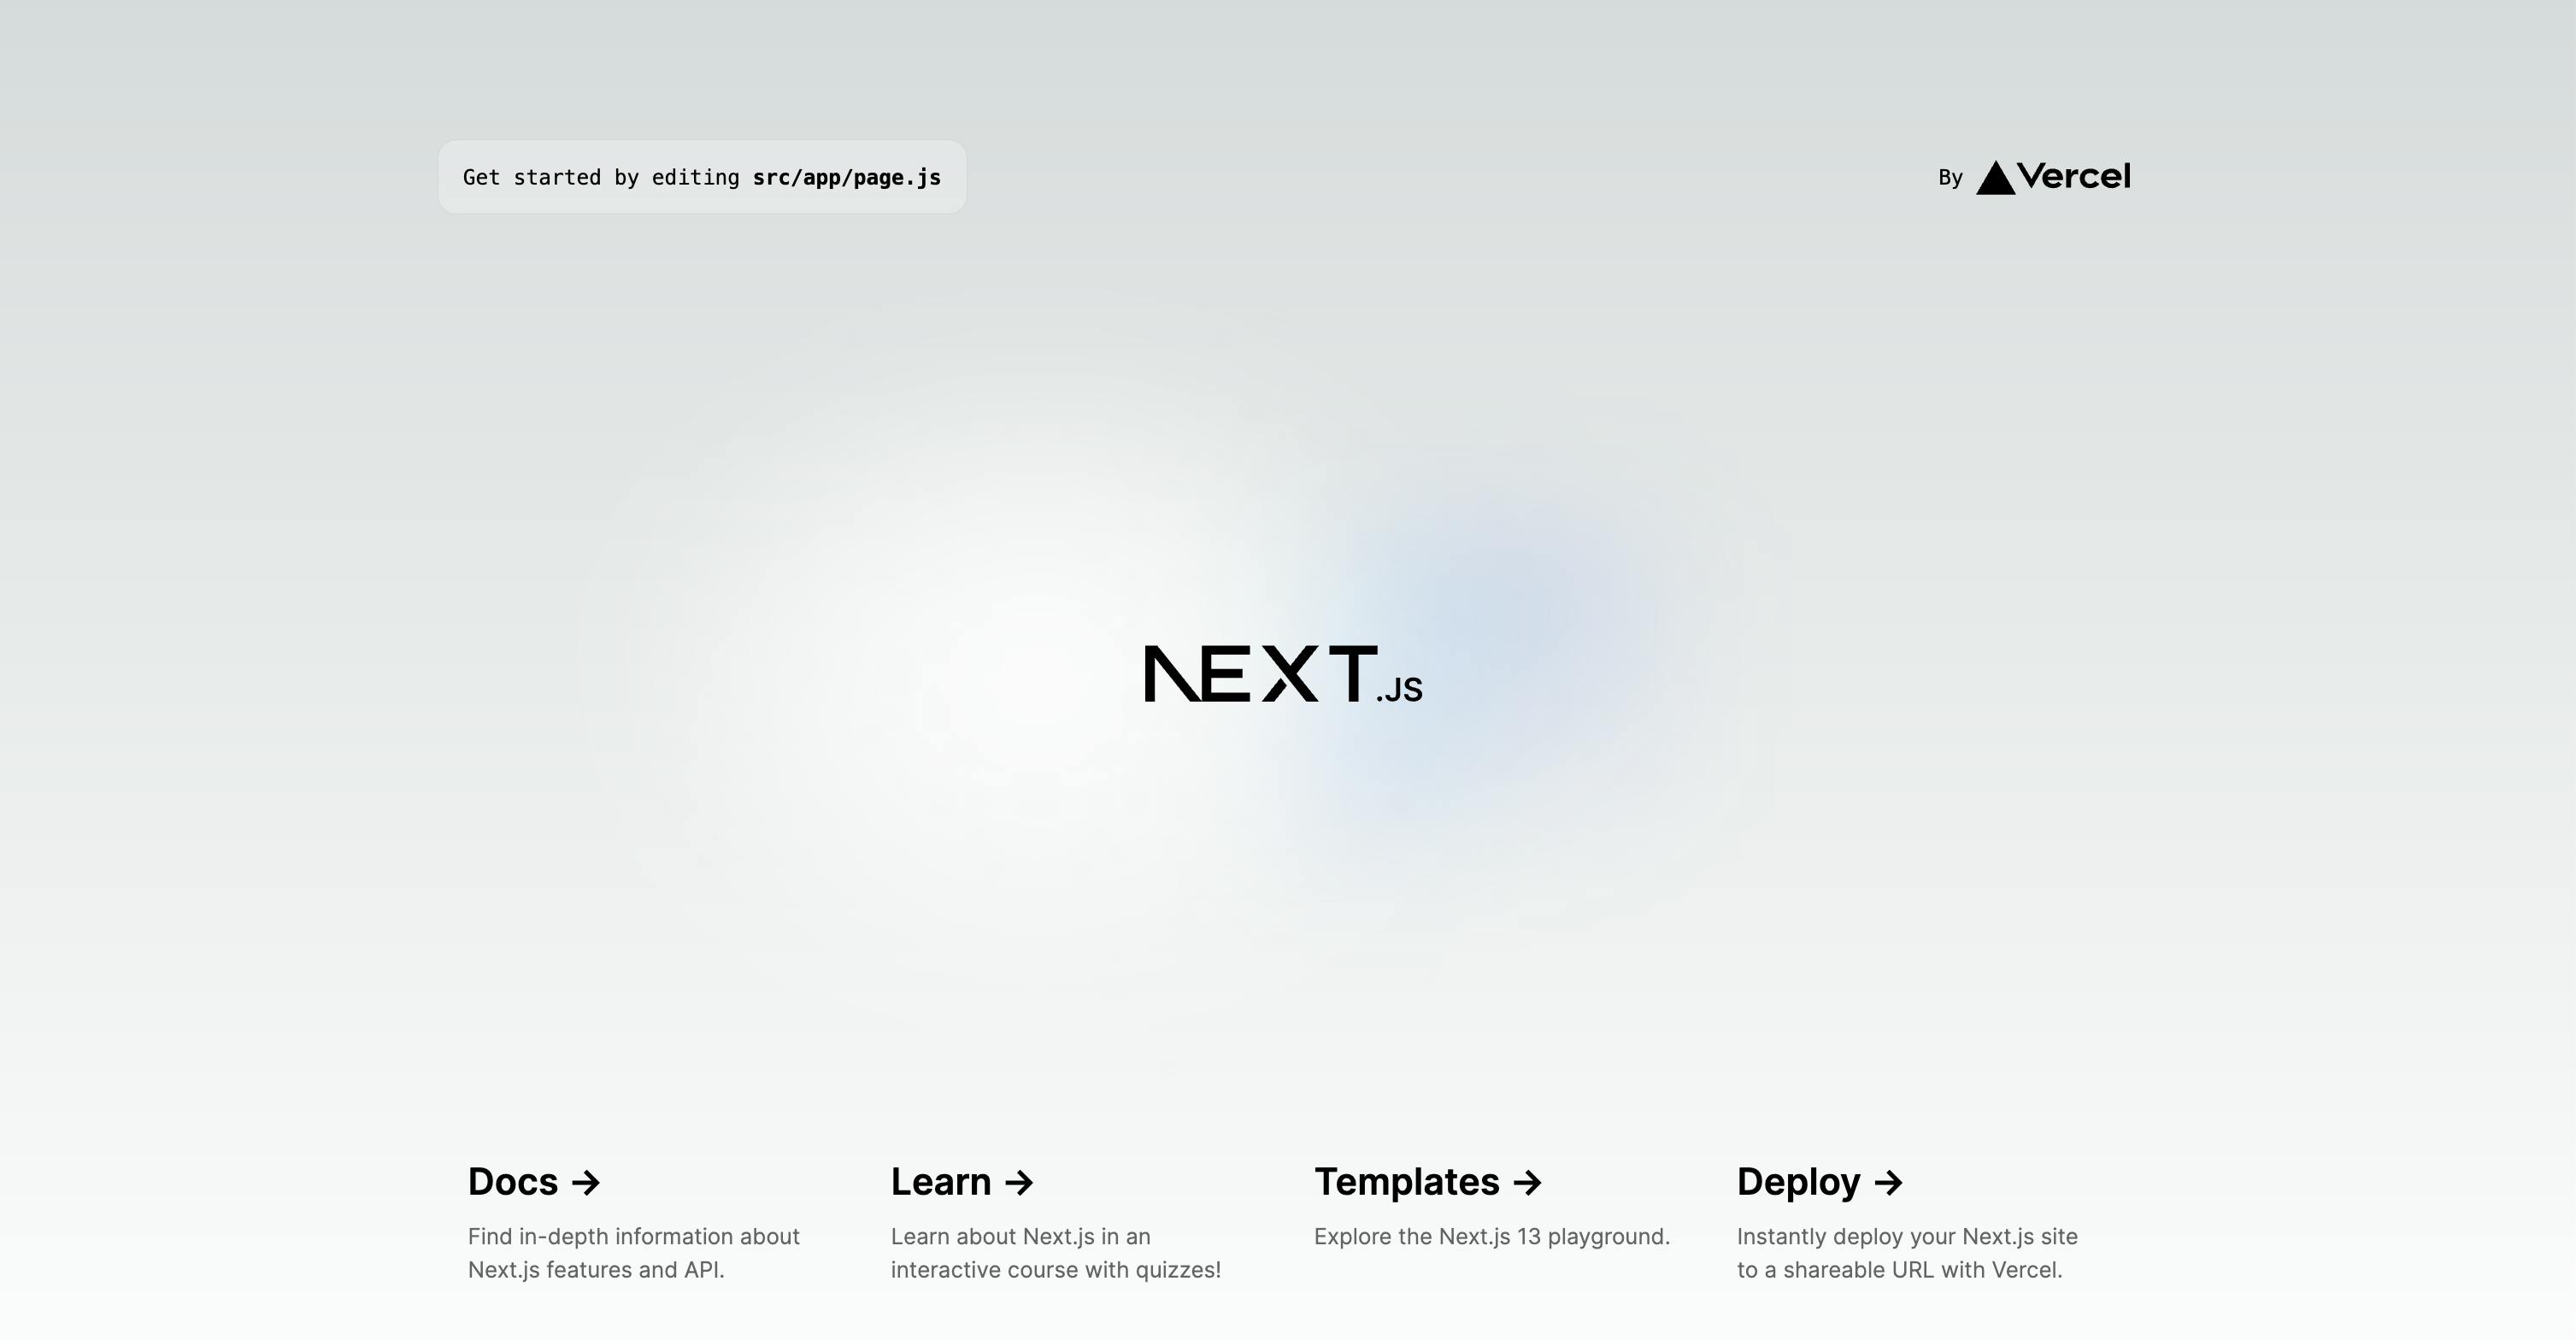 An image of Next.js project homepage.